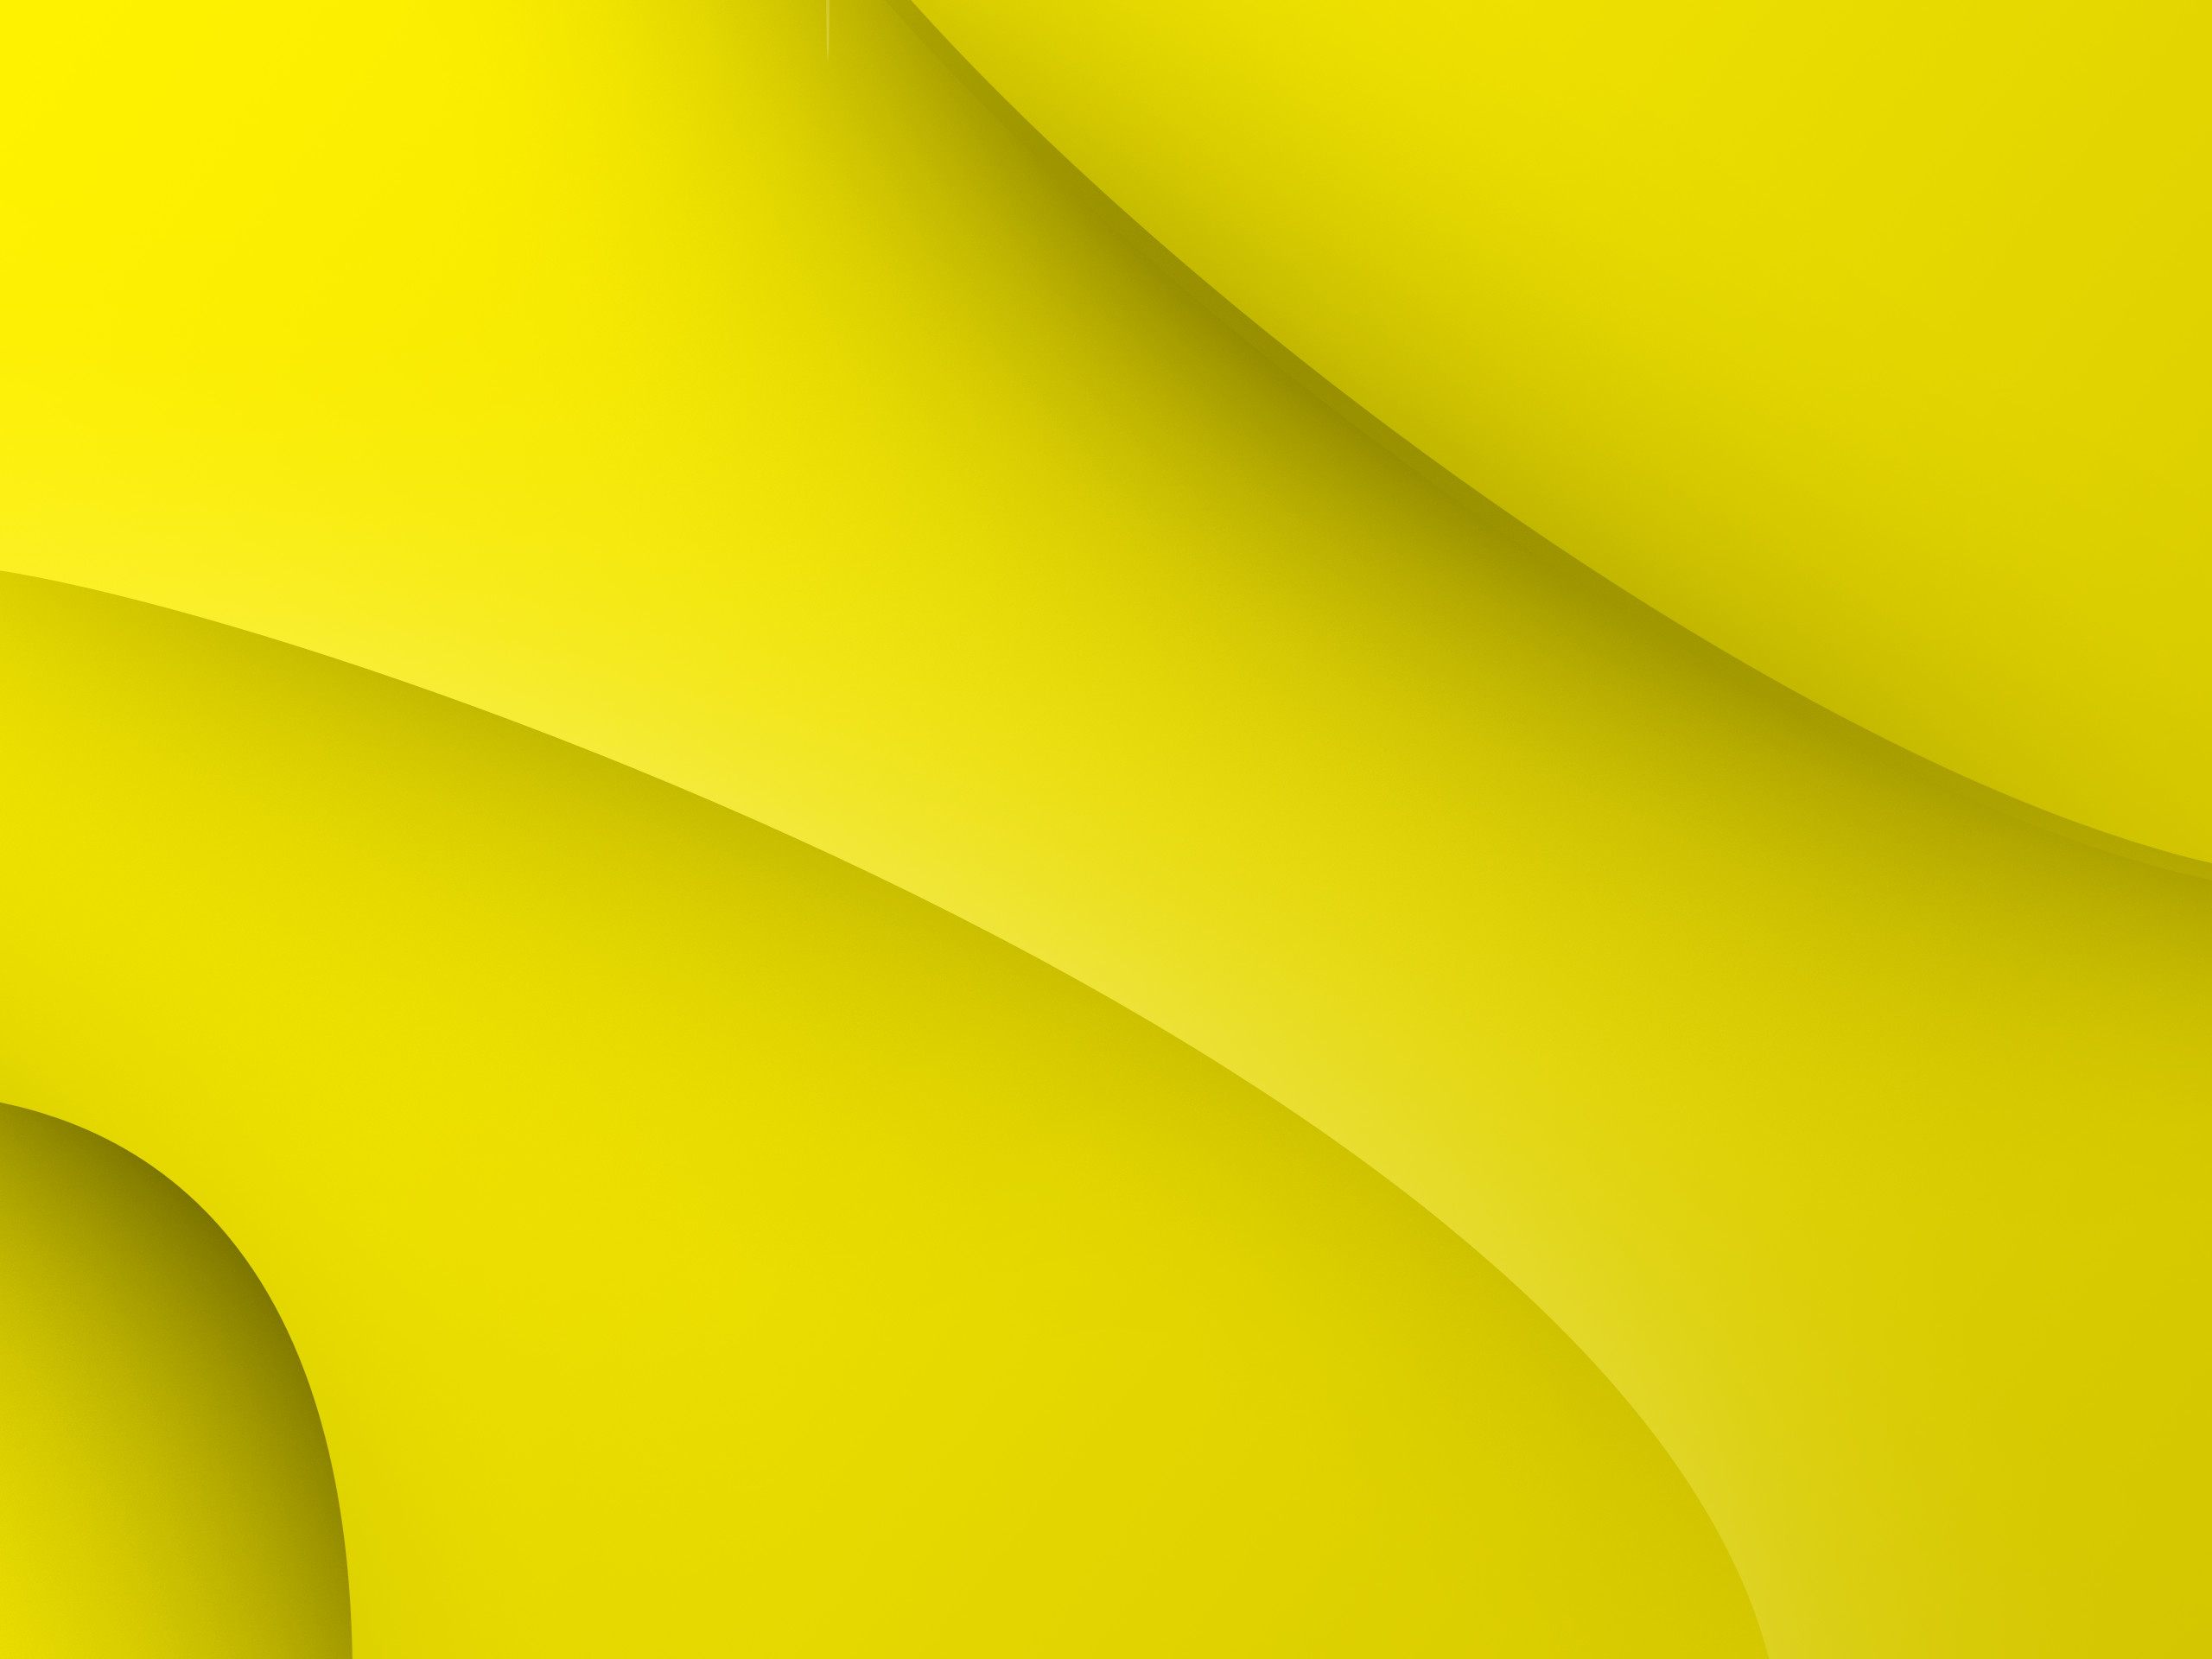 2560x1920, Solid Yellow Wallpaper Images 
 Data Id - Yellow Line Football Background - HD Wallpaper 